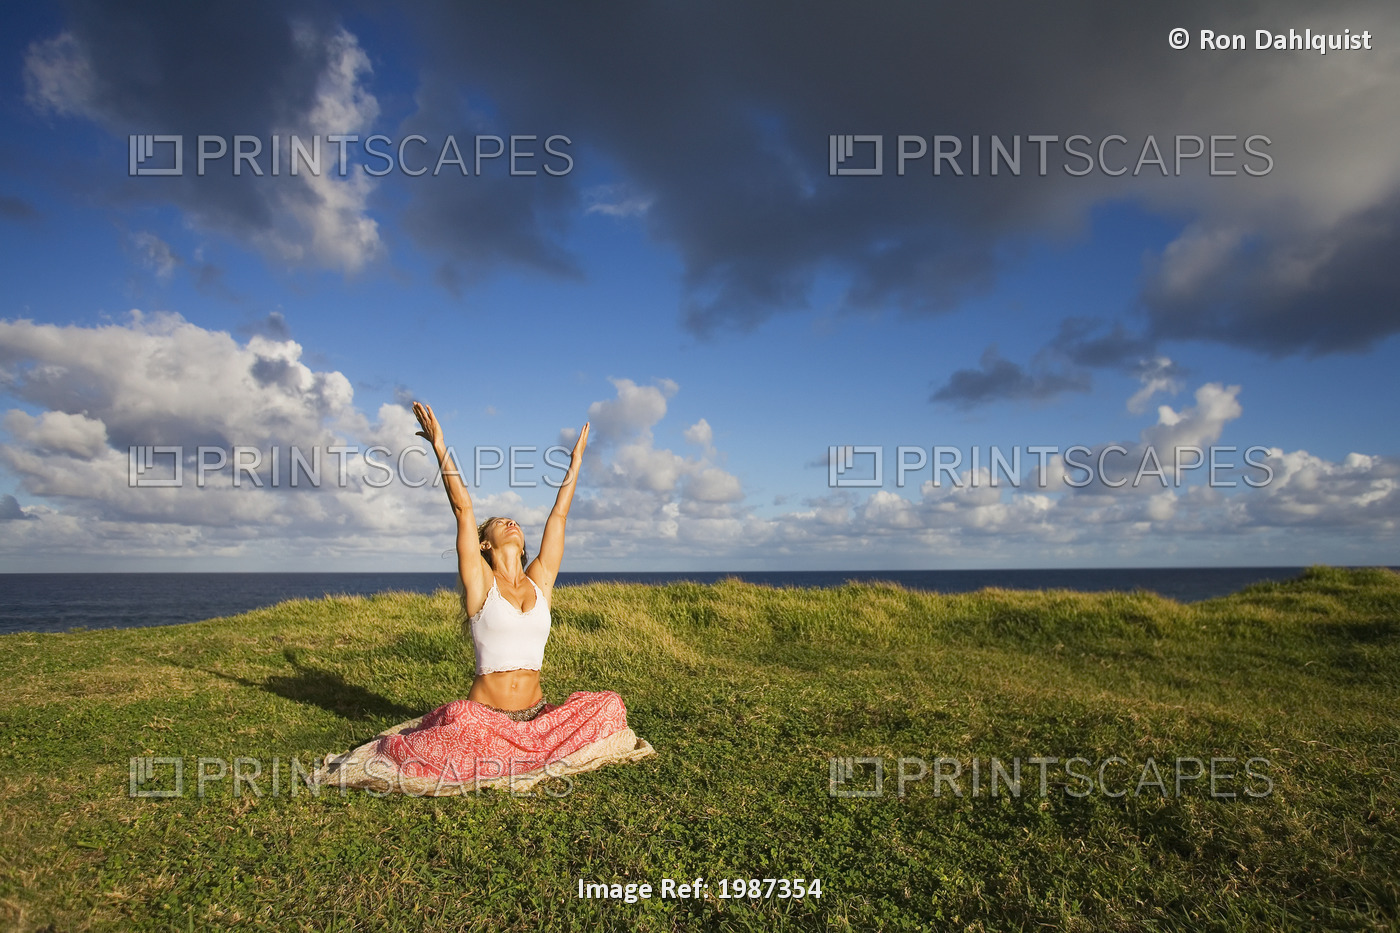 Hawaii, Maui, Young Woman Doing Yoga On Grassy Hill Next To The Ocean.